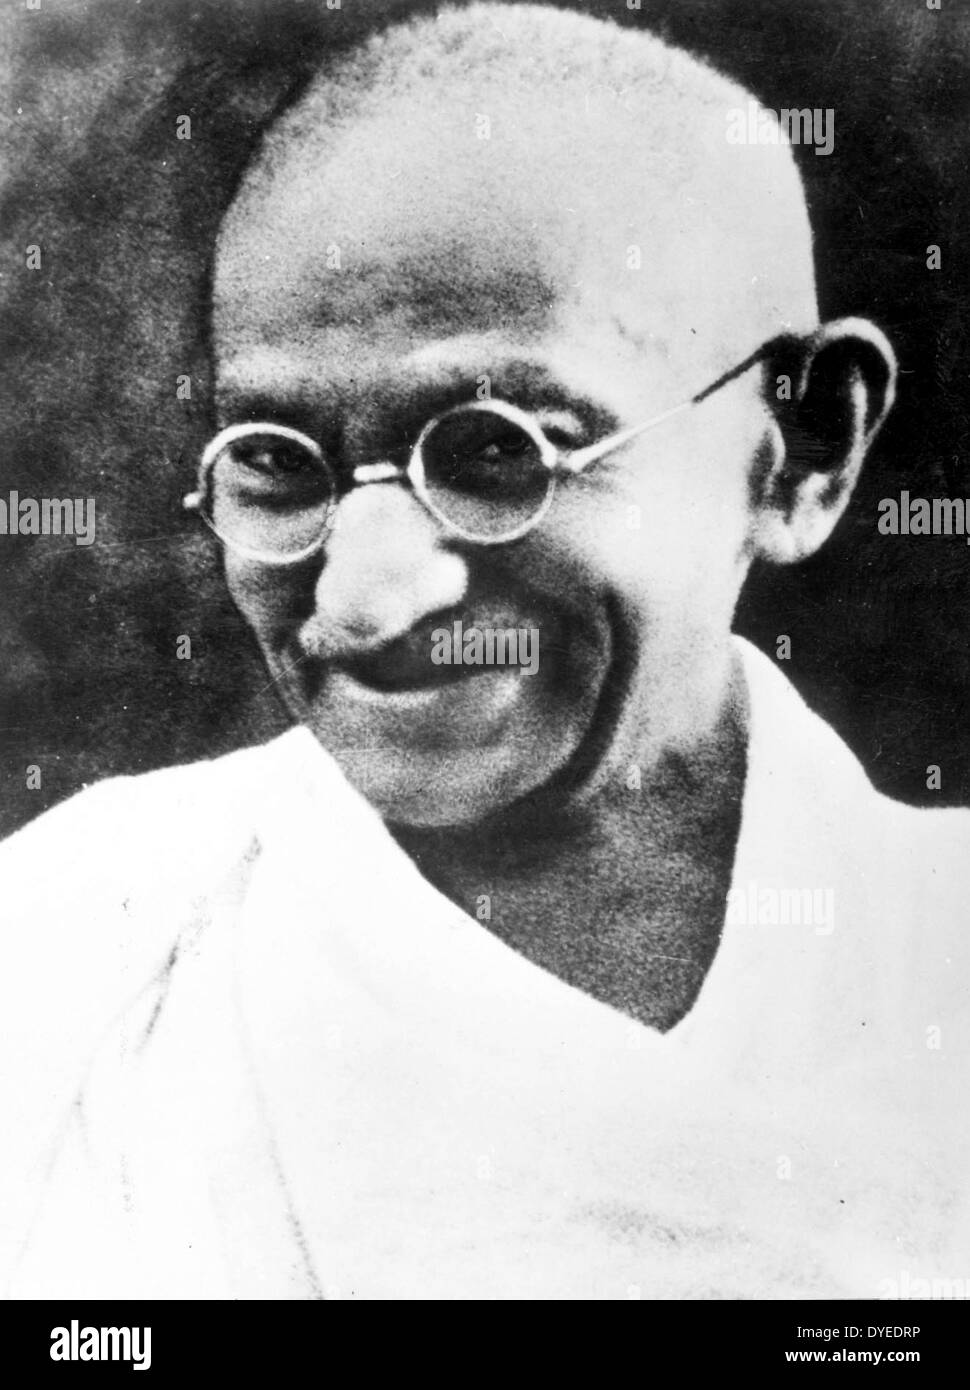 Happy Gandhi Jayanti 2022: Images, Messages, Whatsapp Status, Facebook  Posts | Messages, Photos, Wishes, Pics, Wallpaper | - Times of India